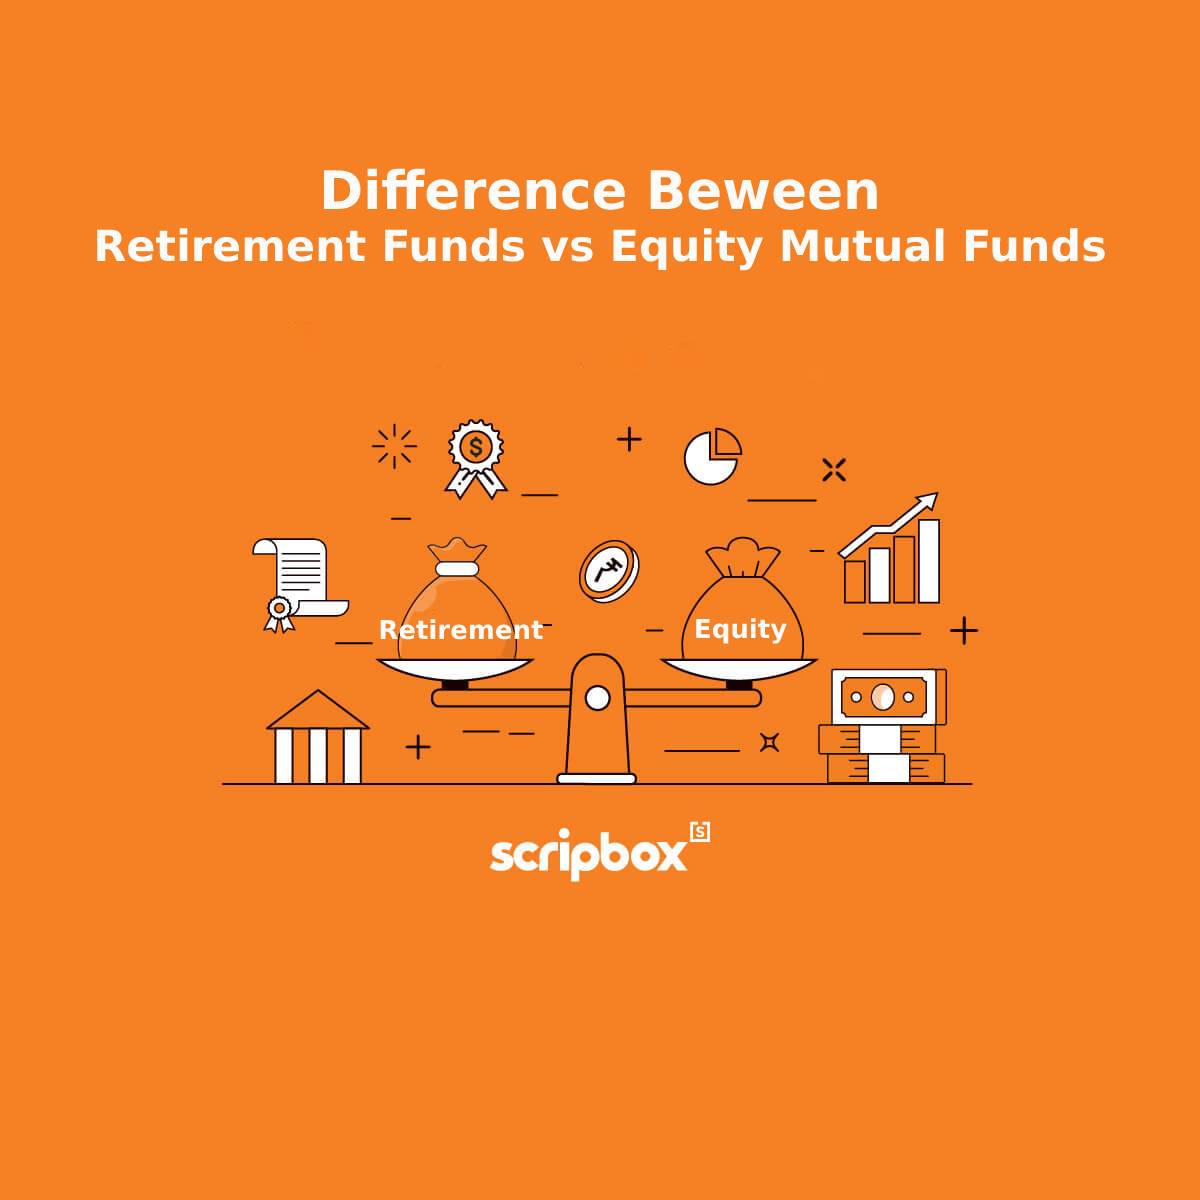 difference between retirement funds vs equity funds